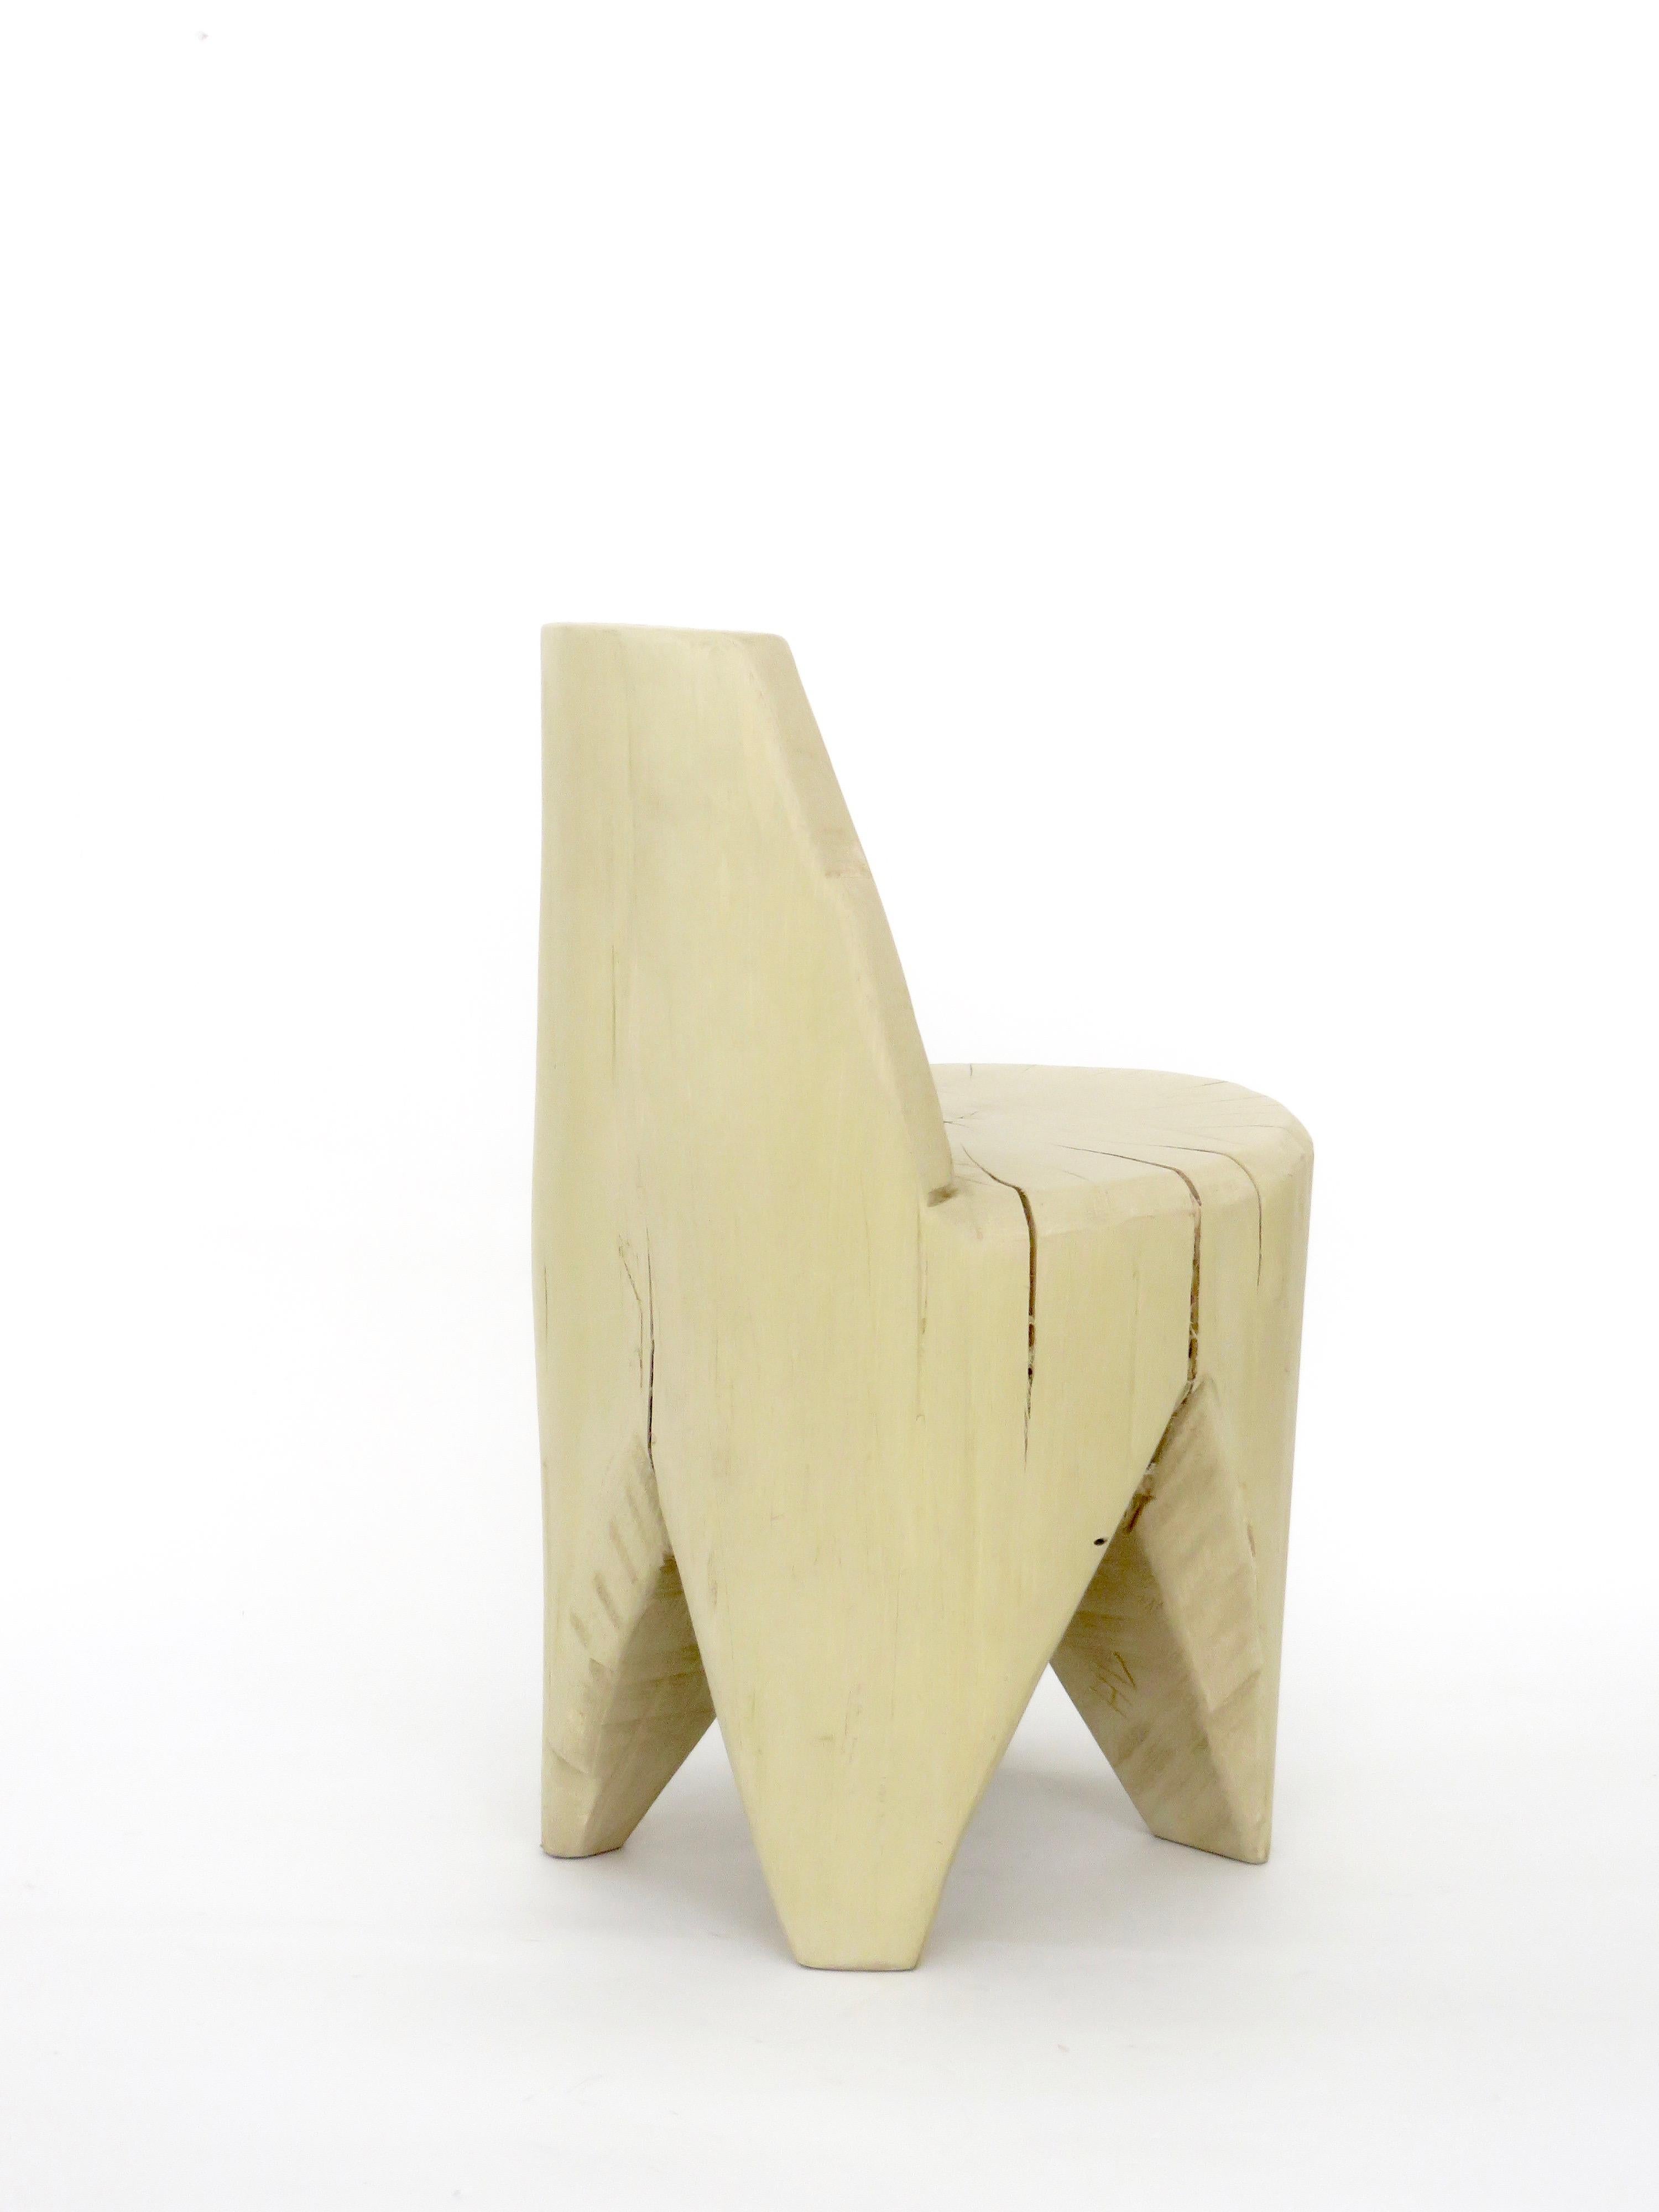 American Hannah Vaughan Contemporary Carved Sculptural Chair, 2019